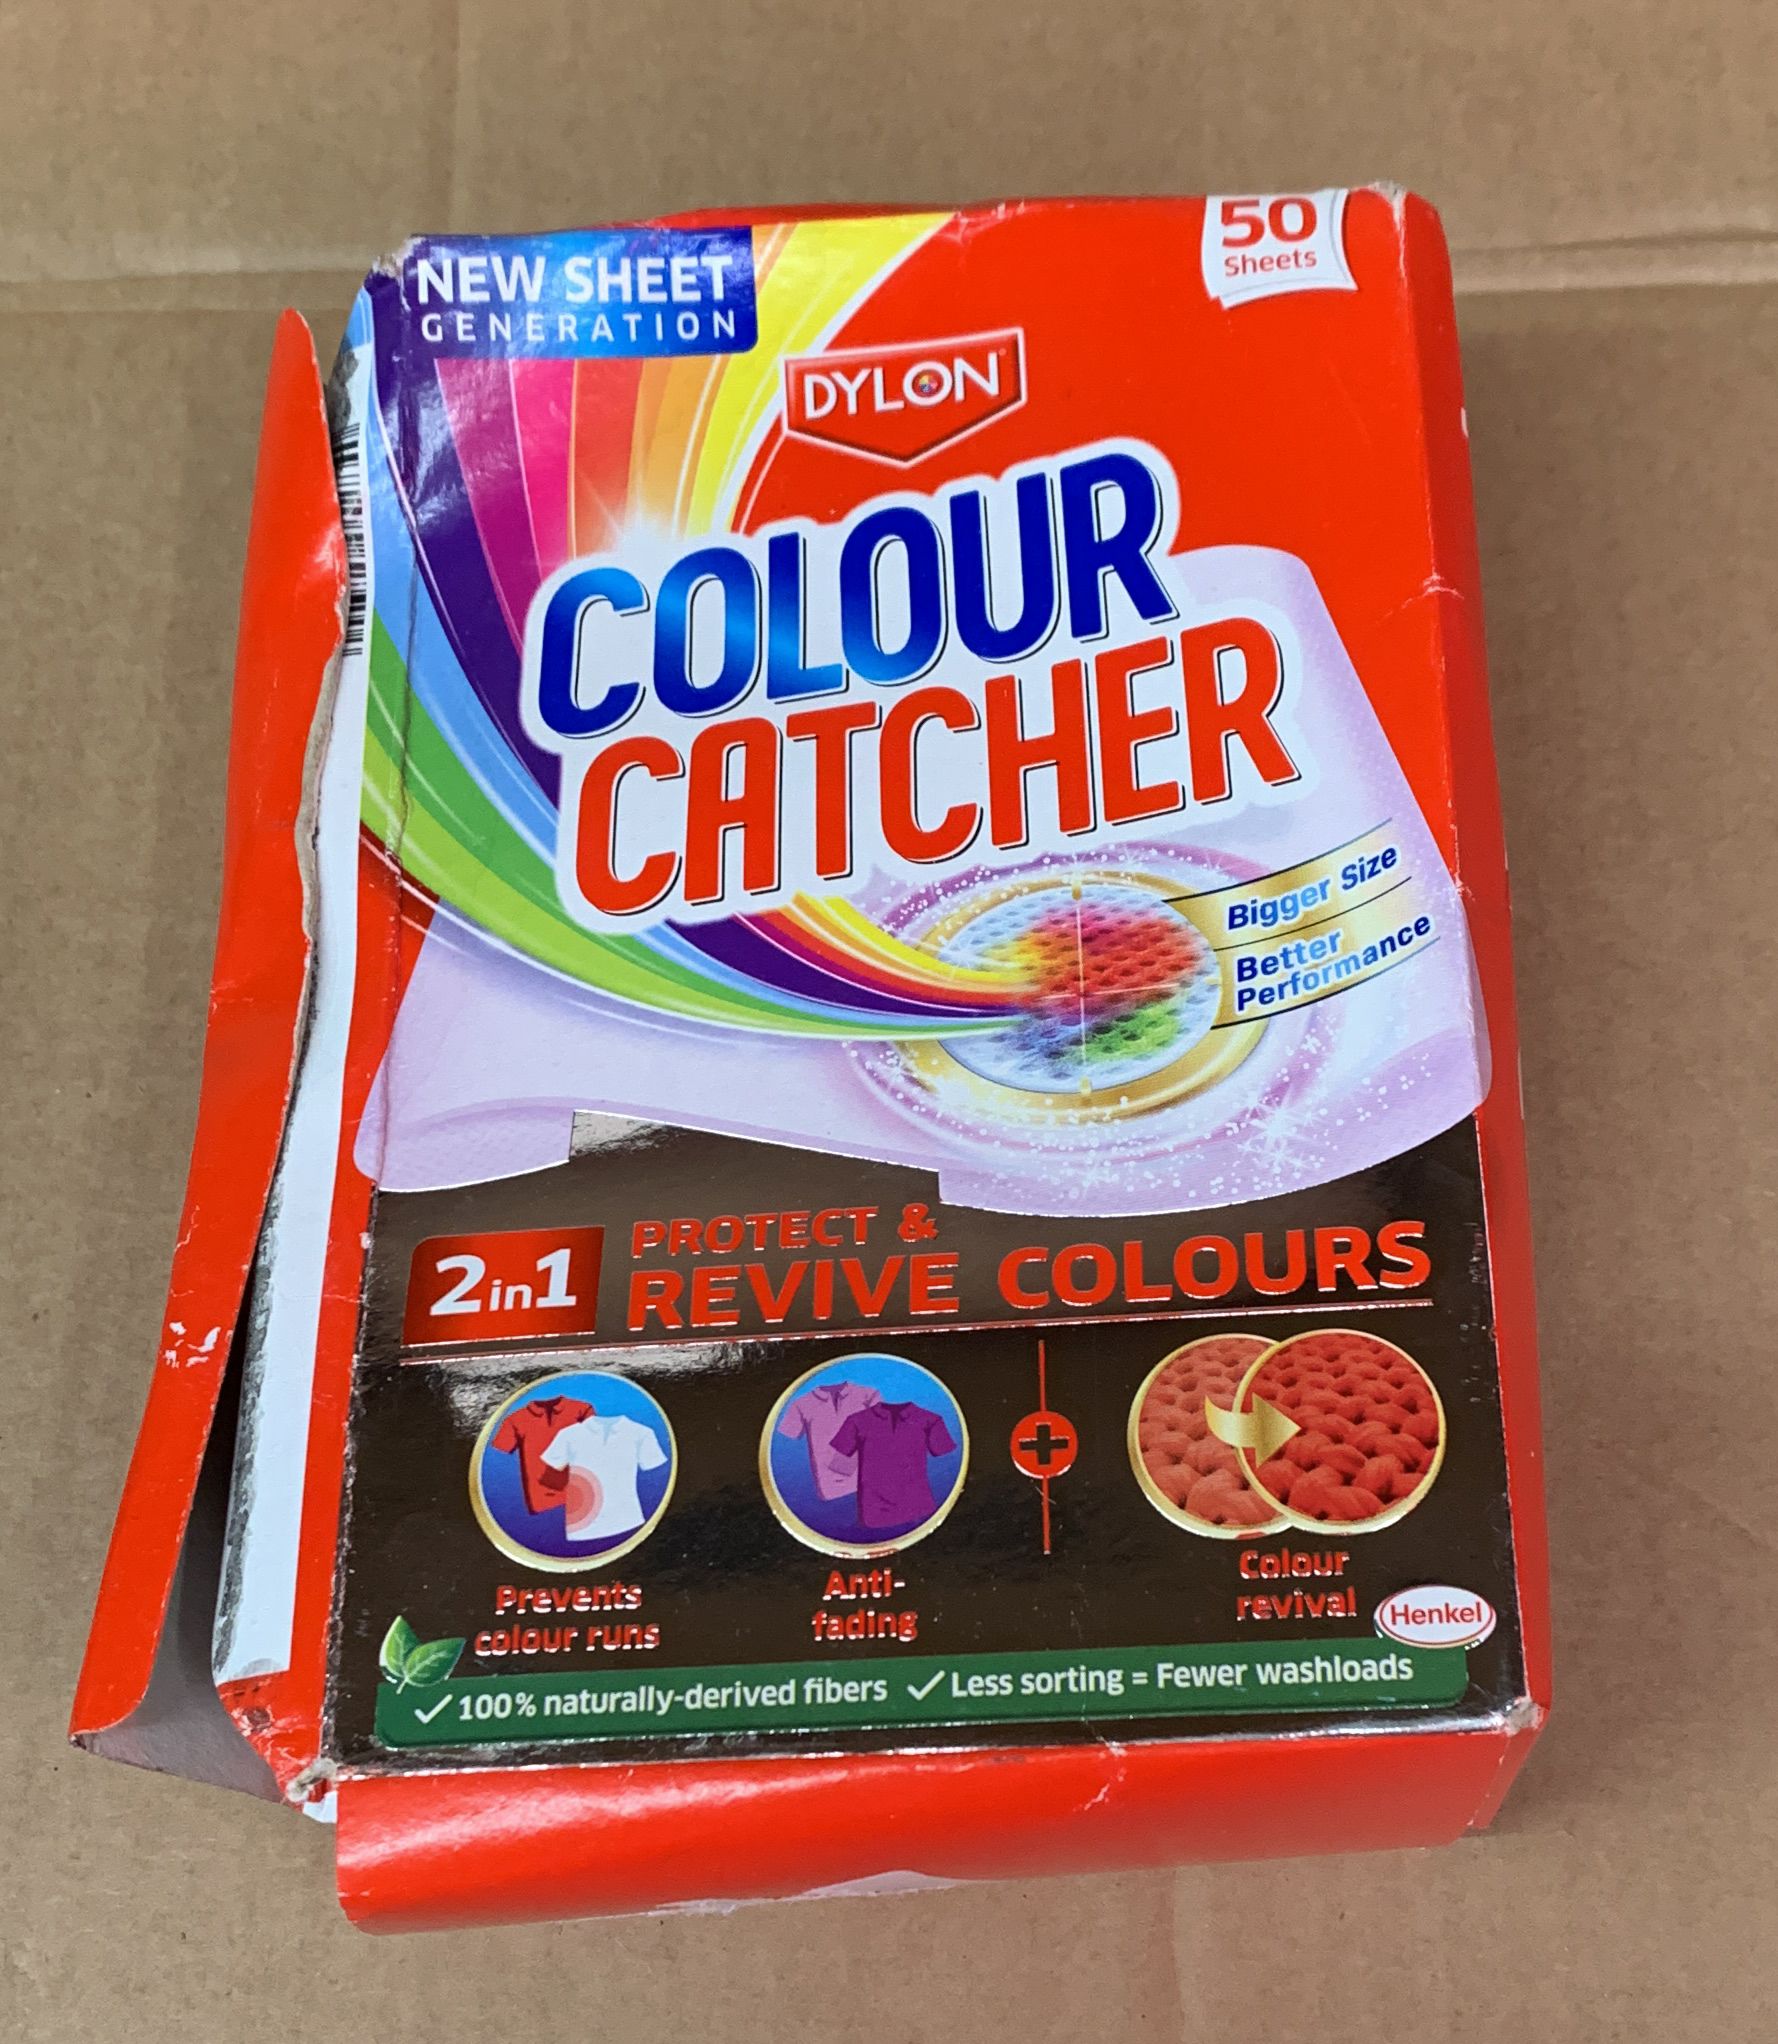 Colour Catcher Laundry Sheets, 2in1 - 50 Sheets 2840